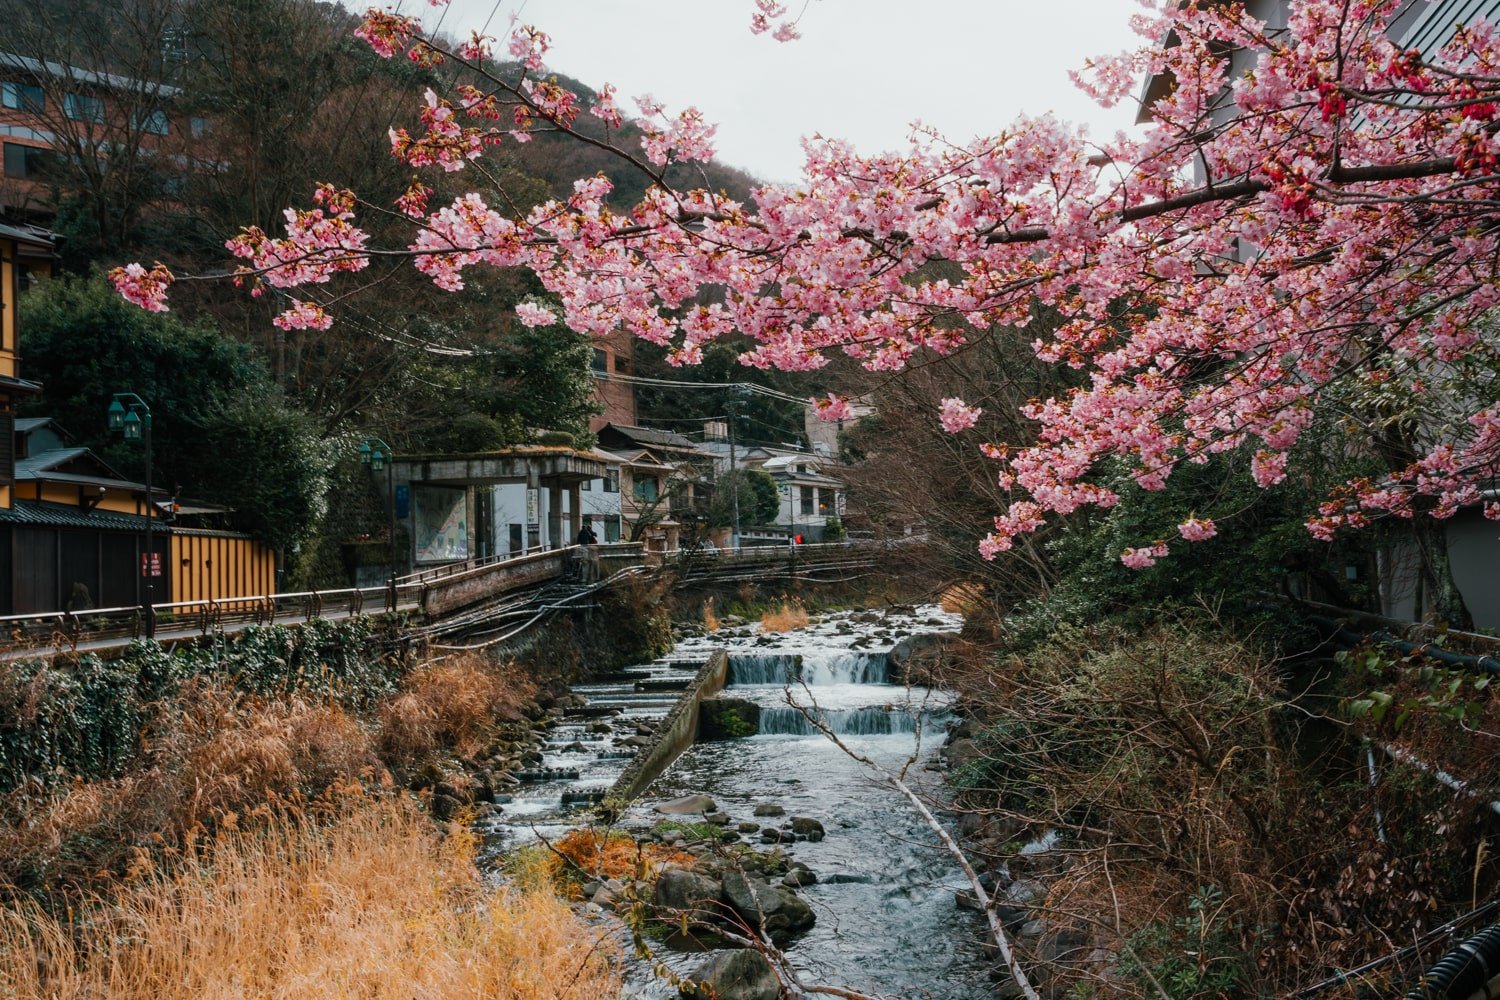 Plum blossoms in bloom on tree overlooking the river in Hakone-Yumoto, Japan during the wintertime.